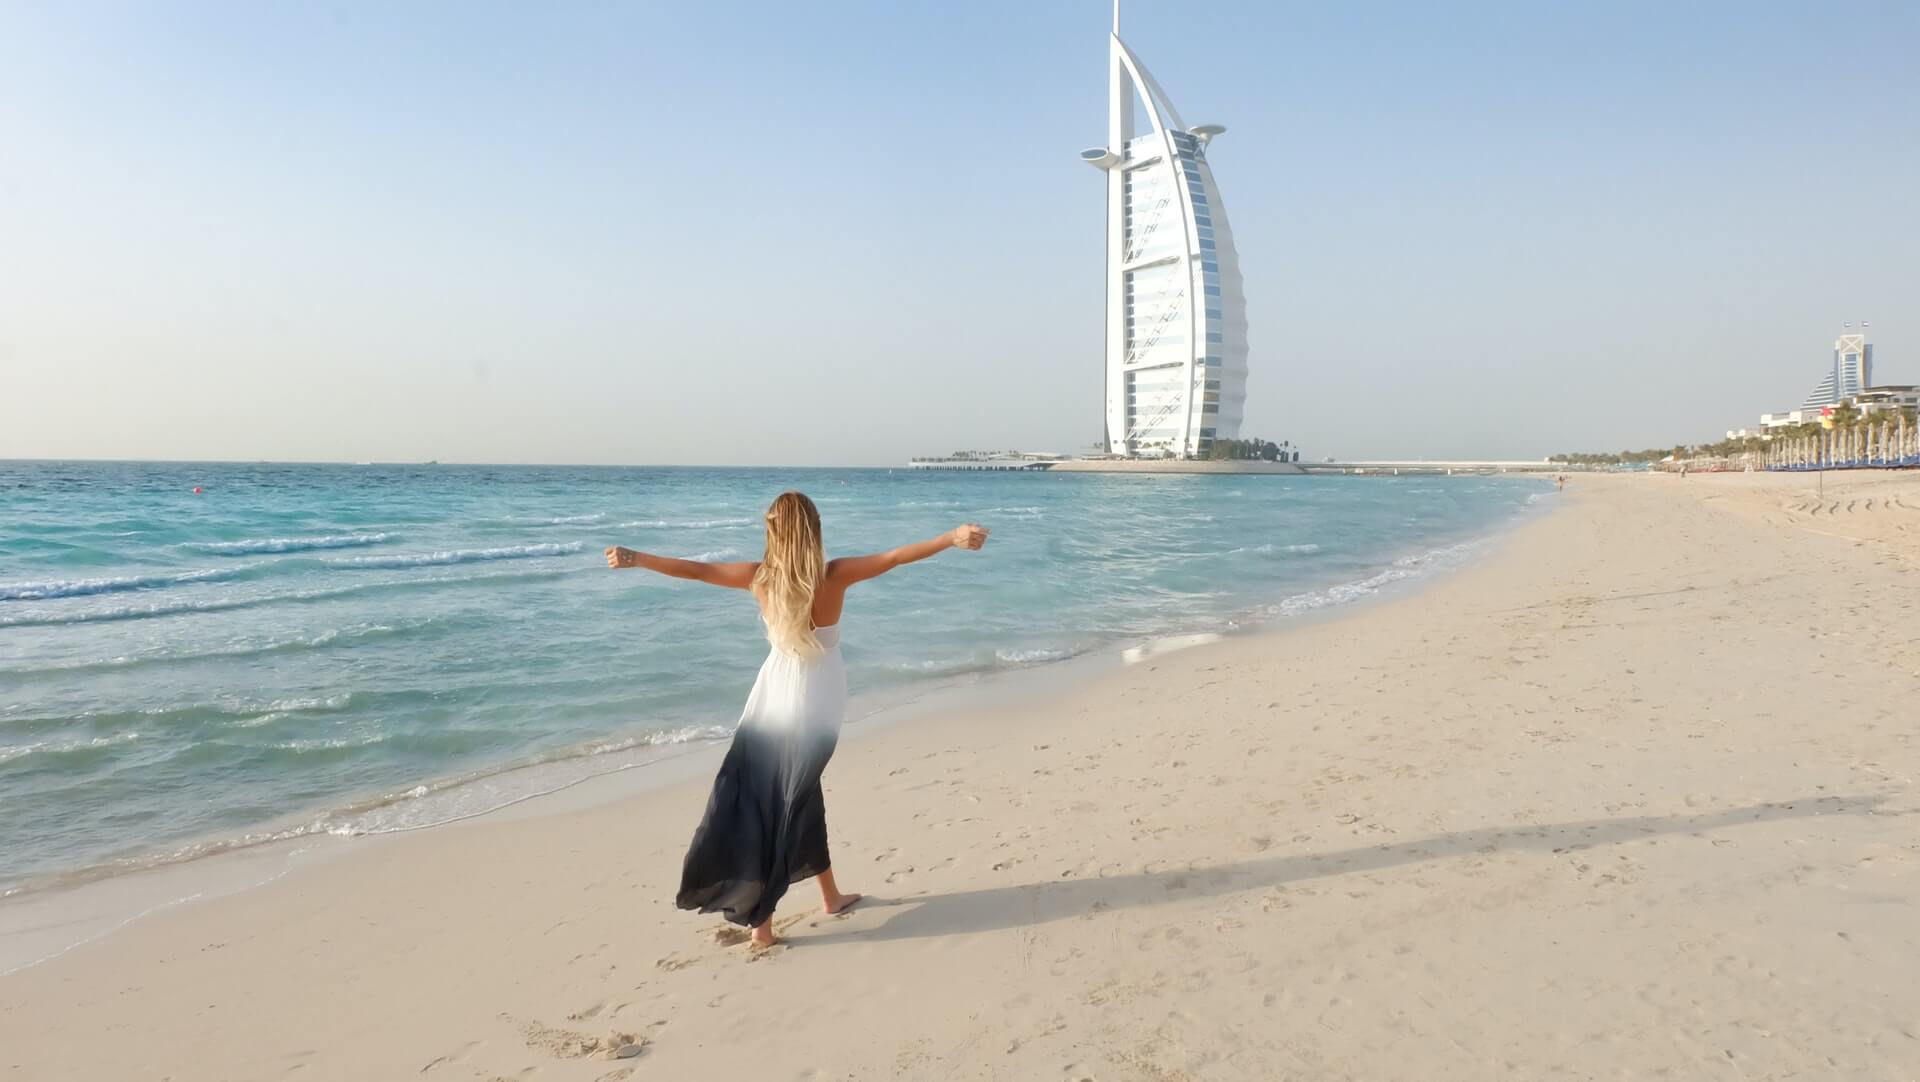 INTERNING IN UAE – The charm of the Middle East